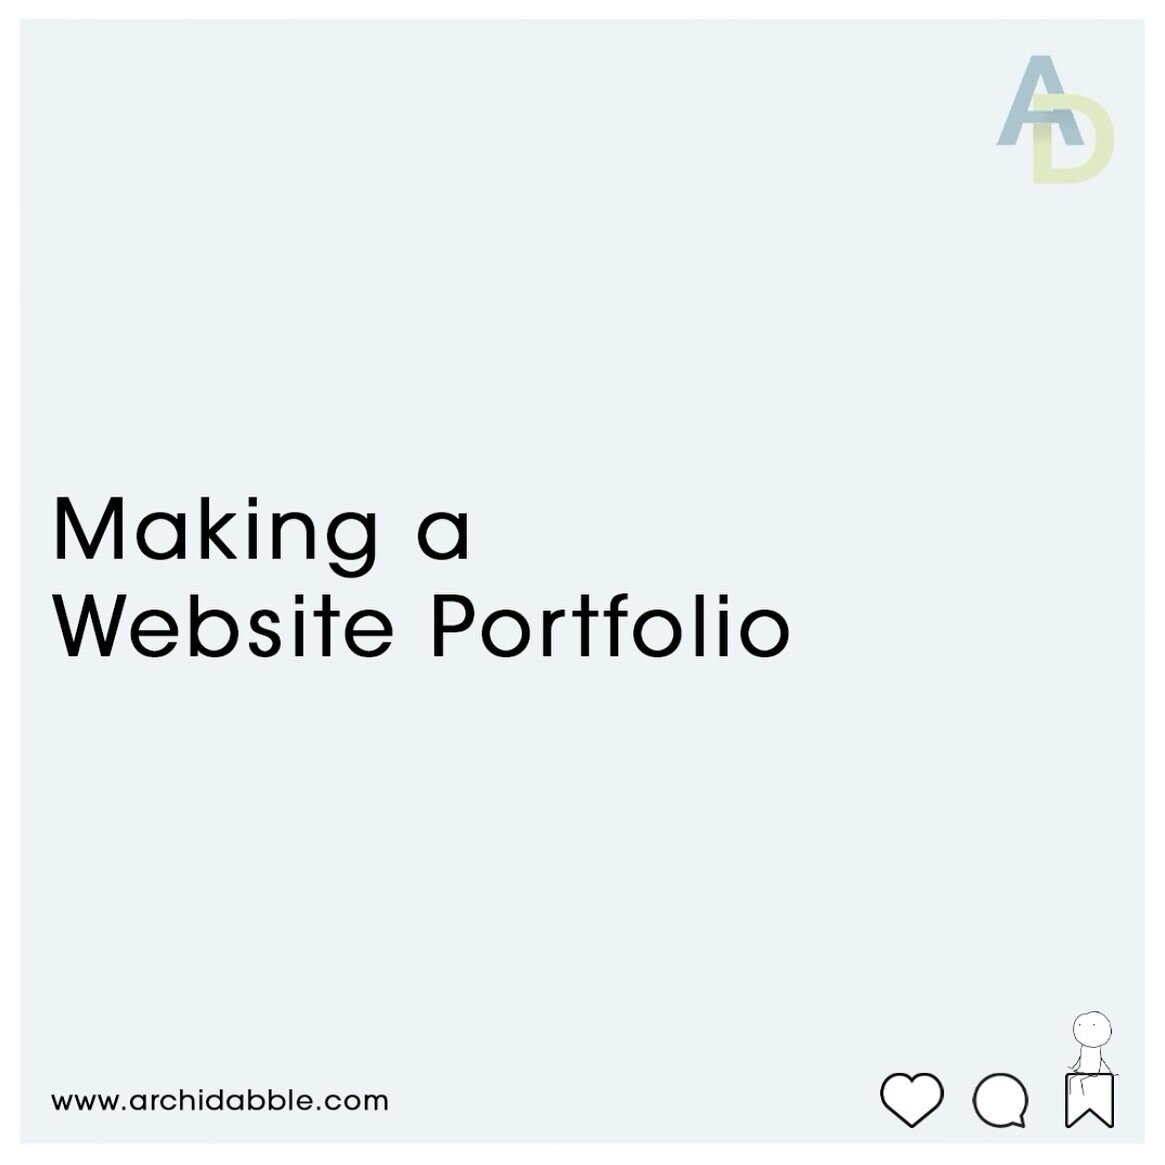 Recently, we&rsquo;ve shared content on how to improve portfolios in the format of a digital PDF or physical print out 💼
-
However, the two mentioned methods are not the only way you can display your hard work for potential employers 🤔 Portfolios i